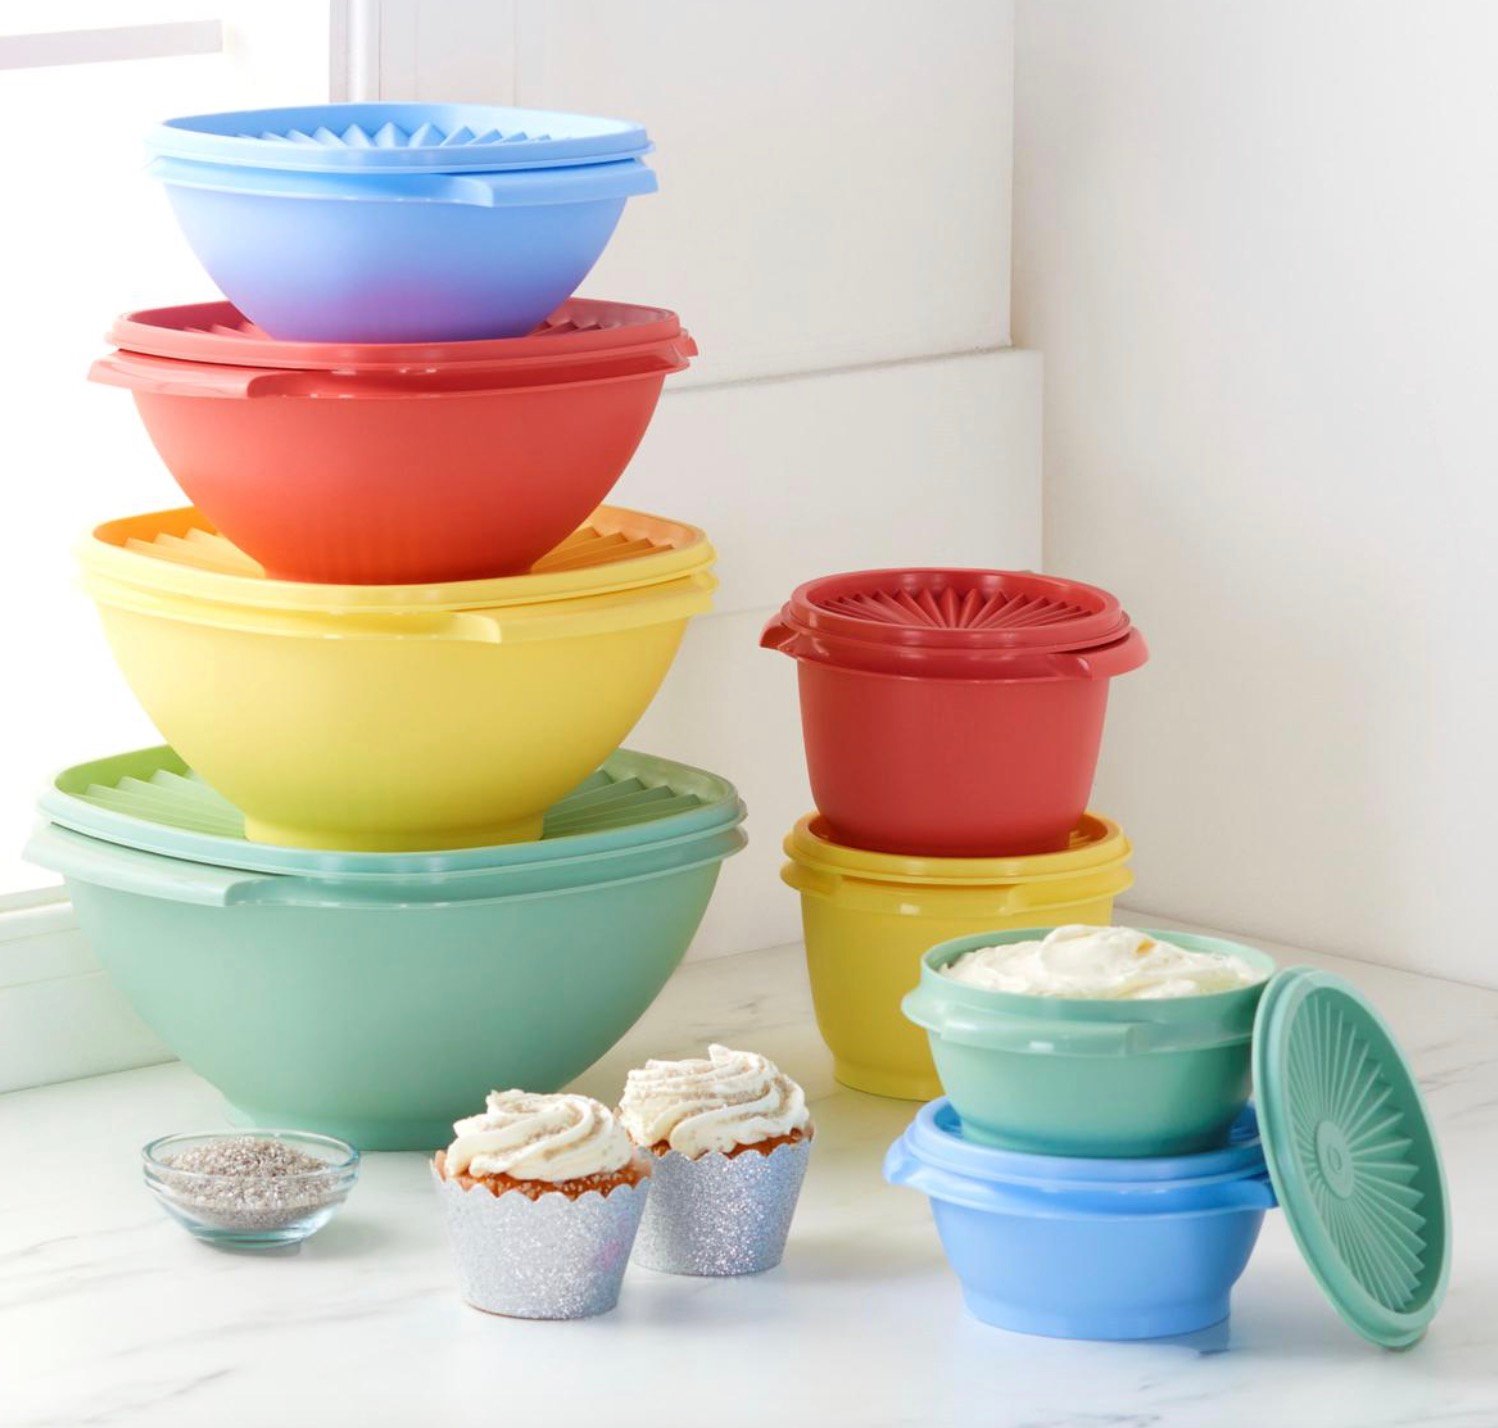 Tupperware Heritage 16-piece Sq. and Spherical Bowl Set solely $28.45 shipped (Reg. $70!)